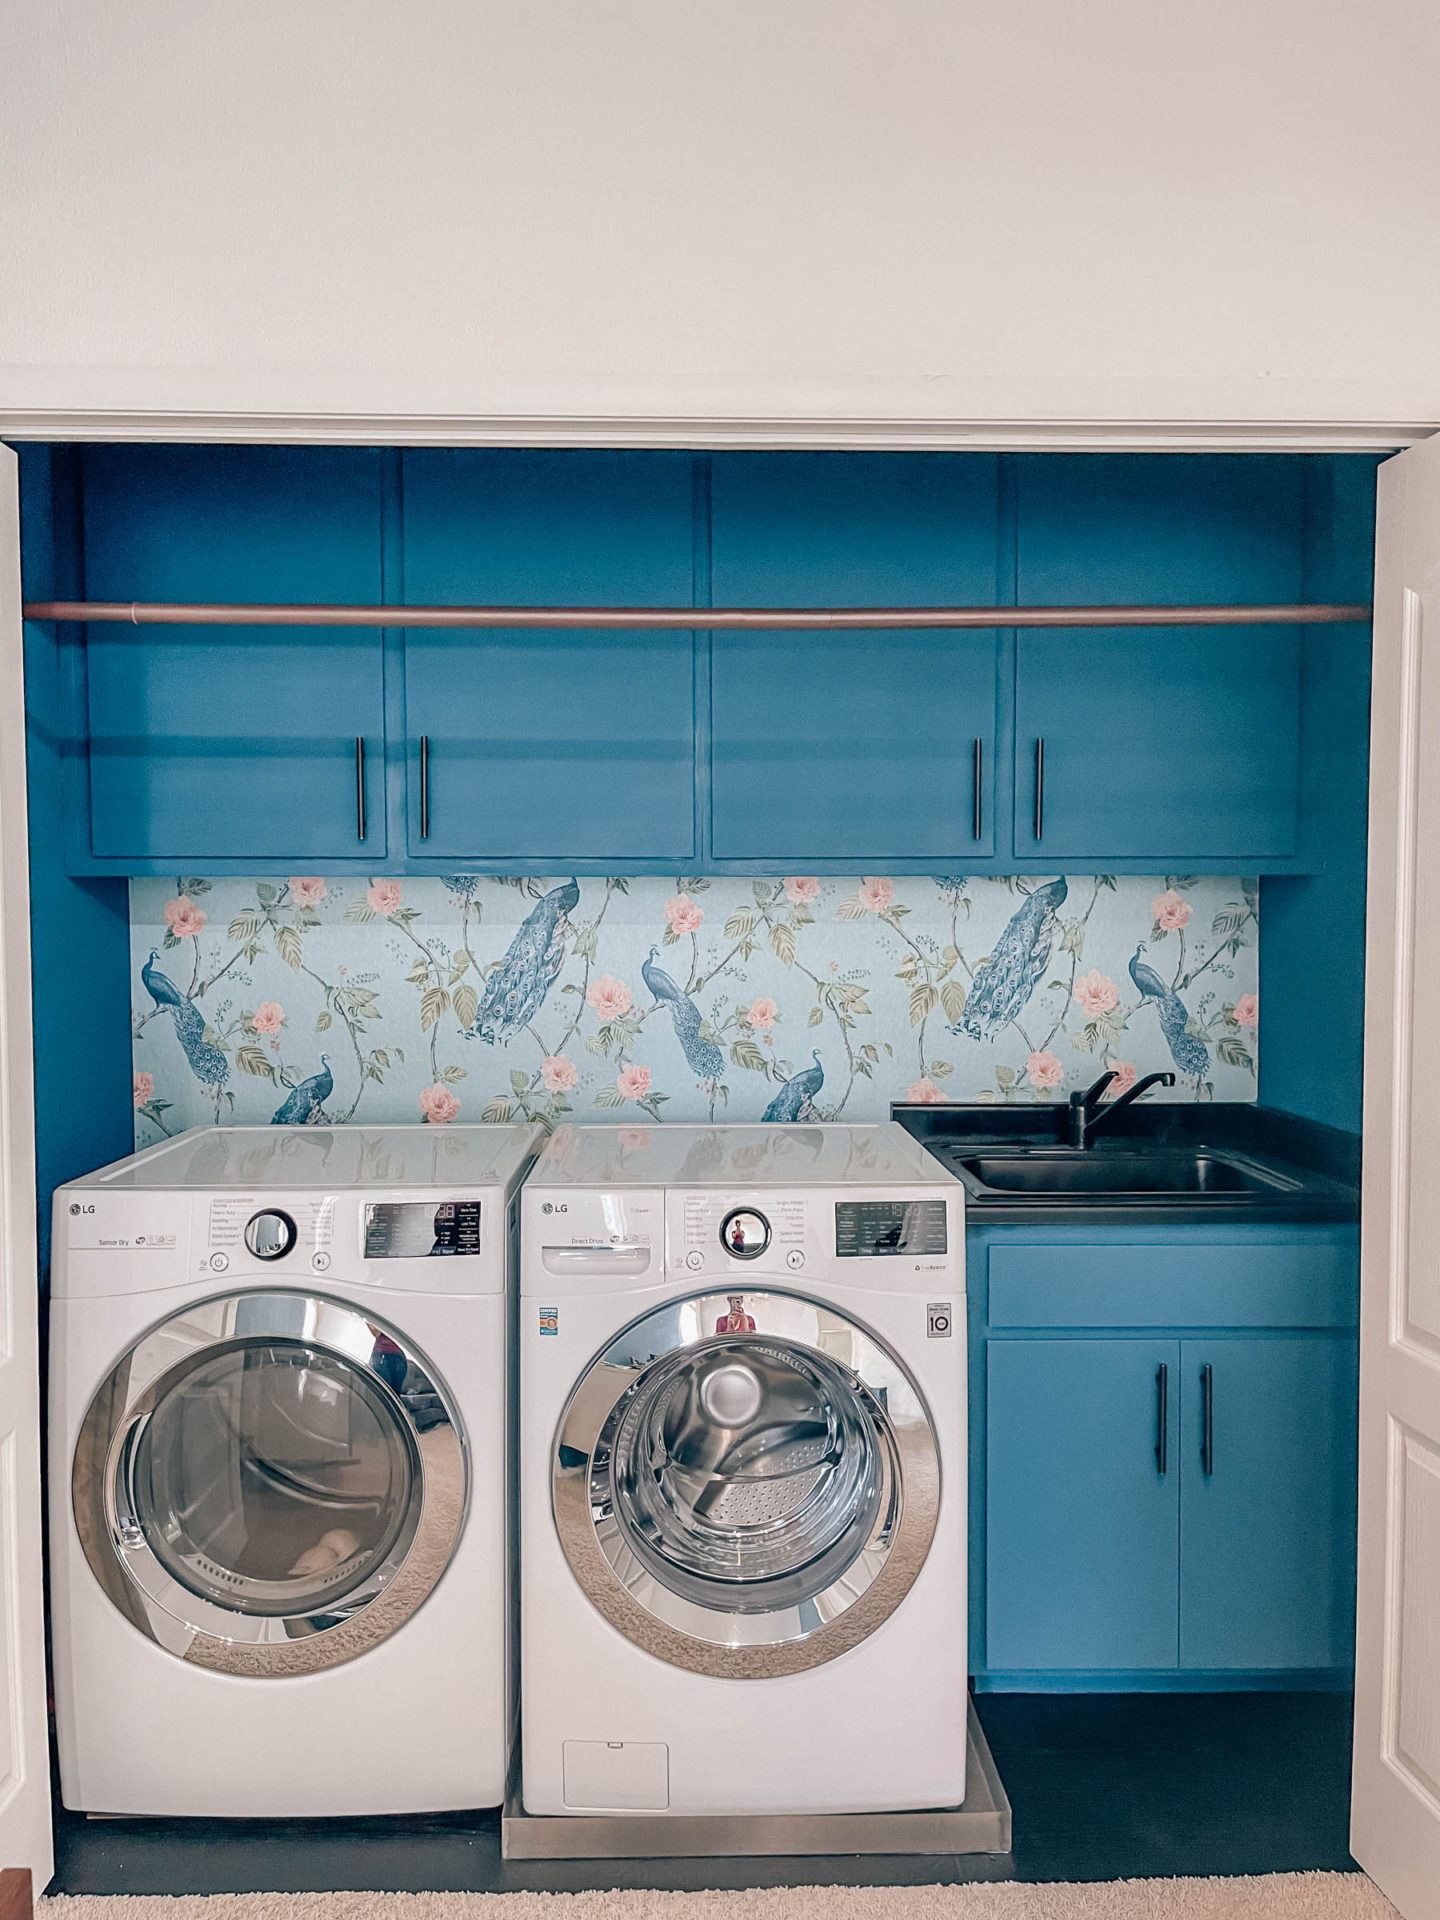 Details 72+ wallpaper laundry room best - in.cdgdbentre